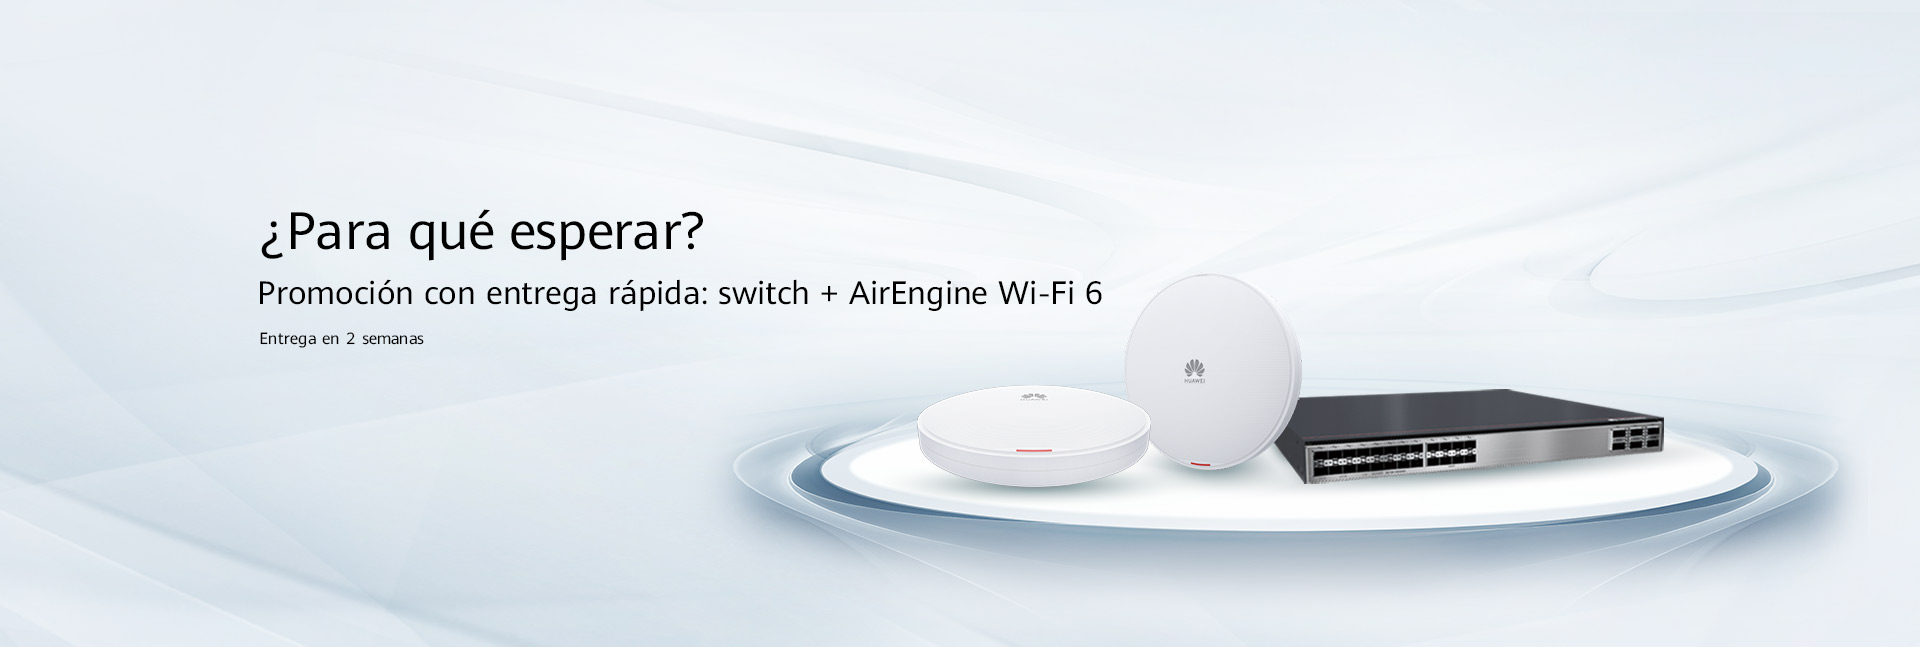 AirEngine WiFi6 pc banner spain 1920x647